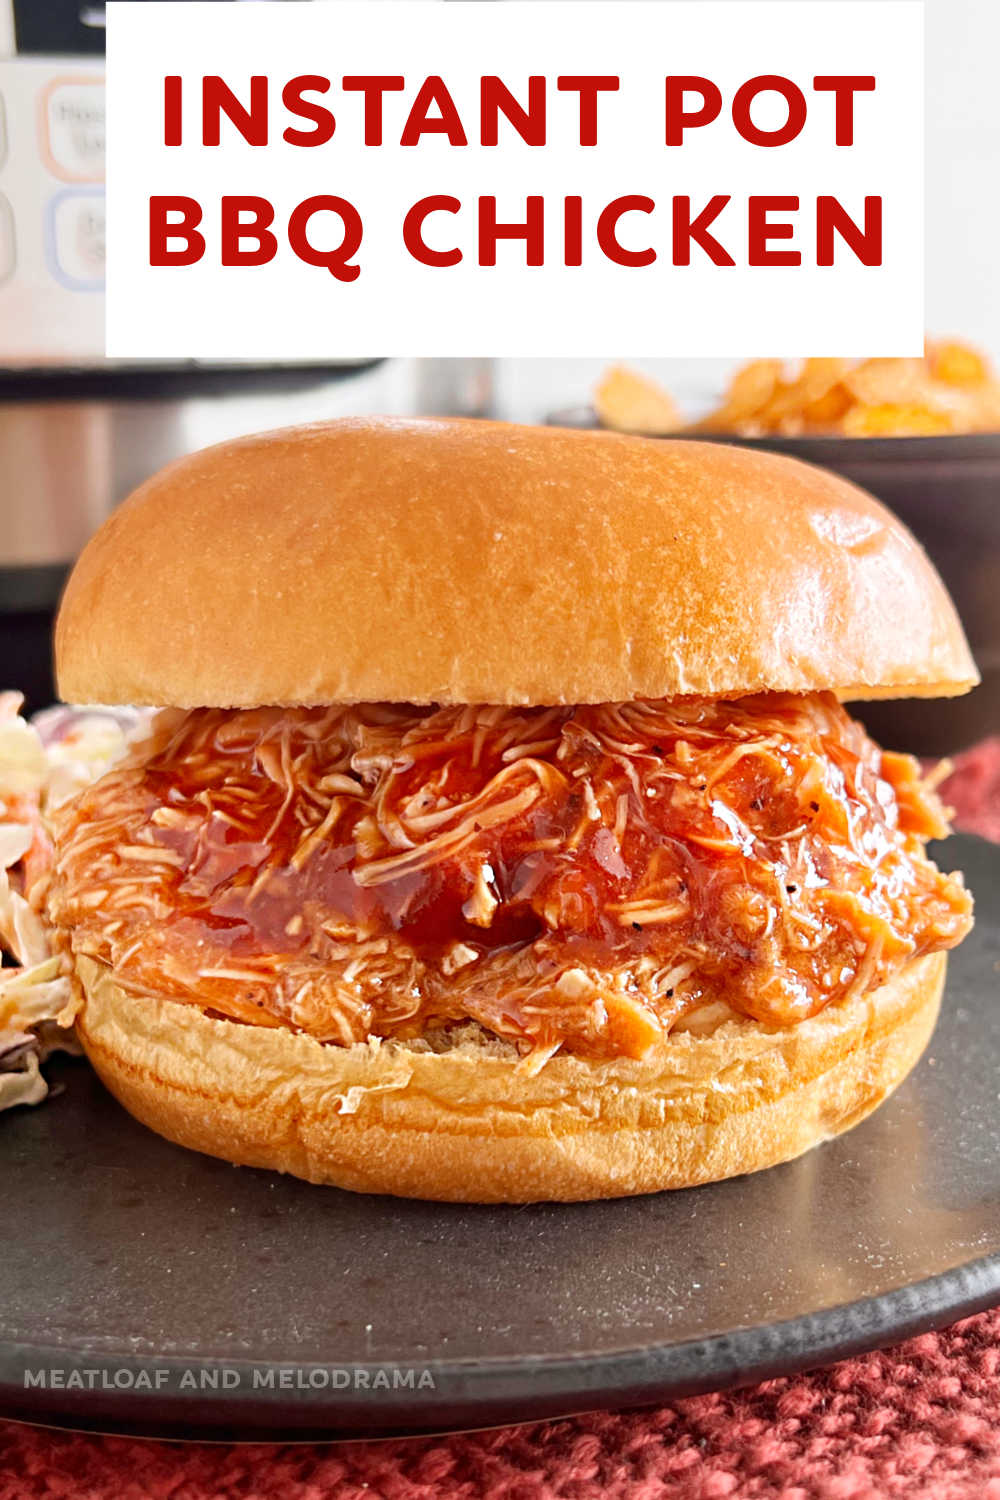 This Instant Pot BBQ Chicken recipe makes easy pulled chicken in the pressure cooker in about 30 minutes. A quick dinner for busy weeknights! Your whole family will love this easy recipe, and it's also perfect for meal prep! via @meamel